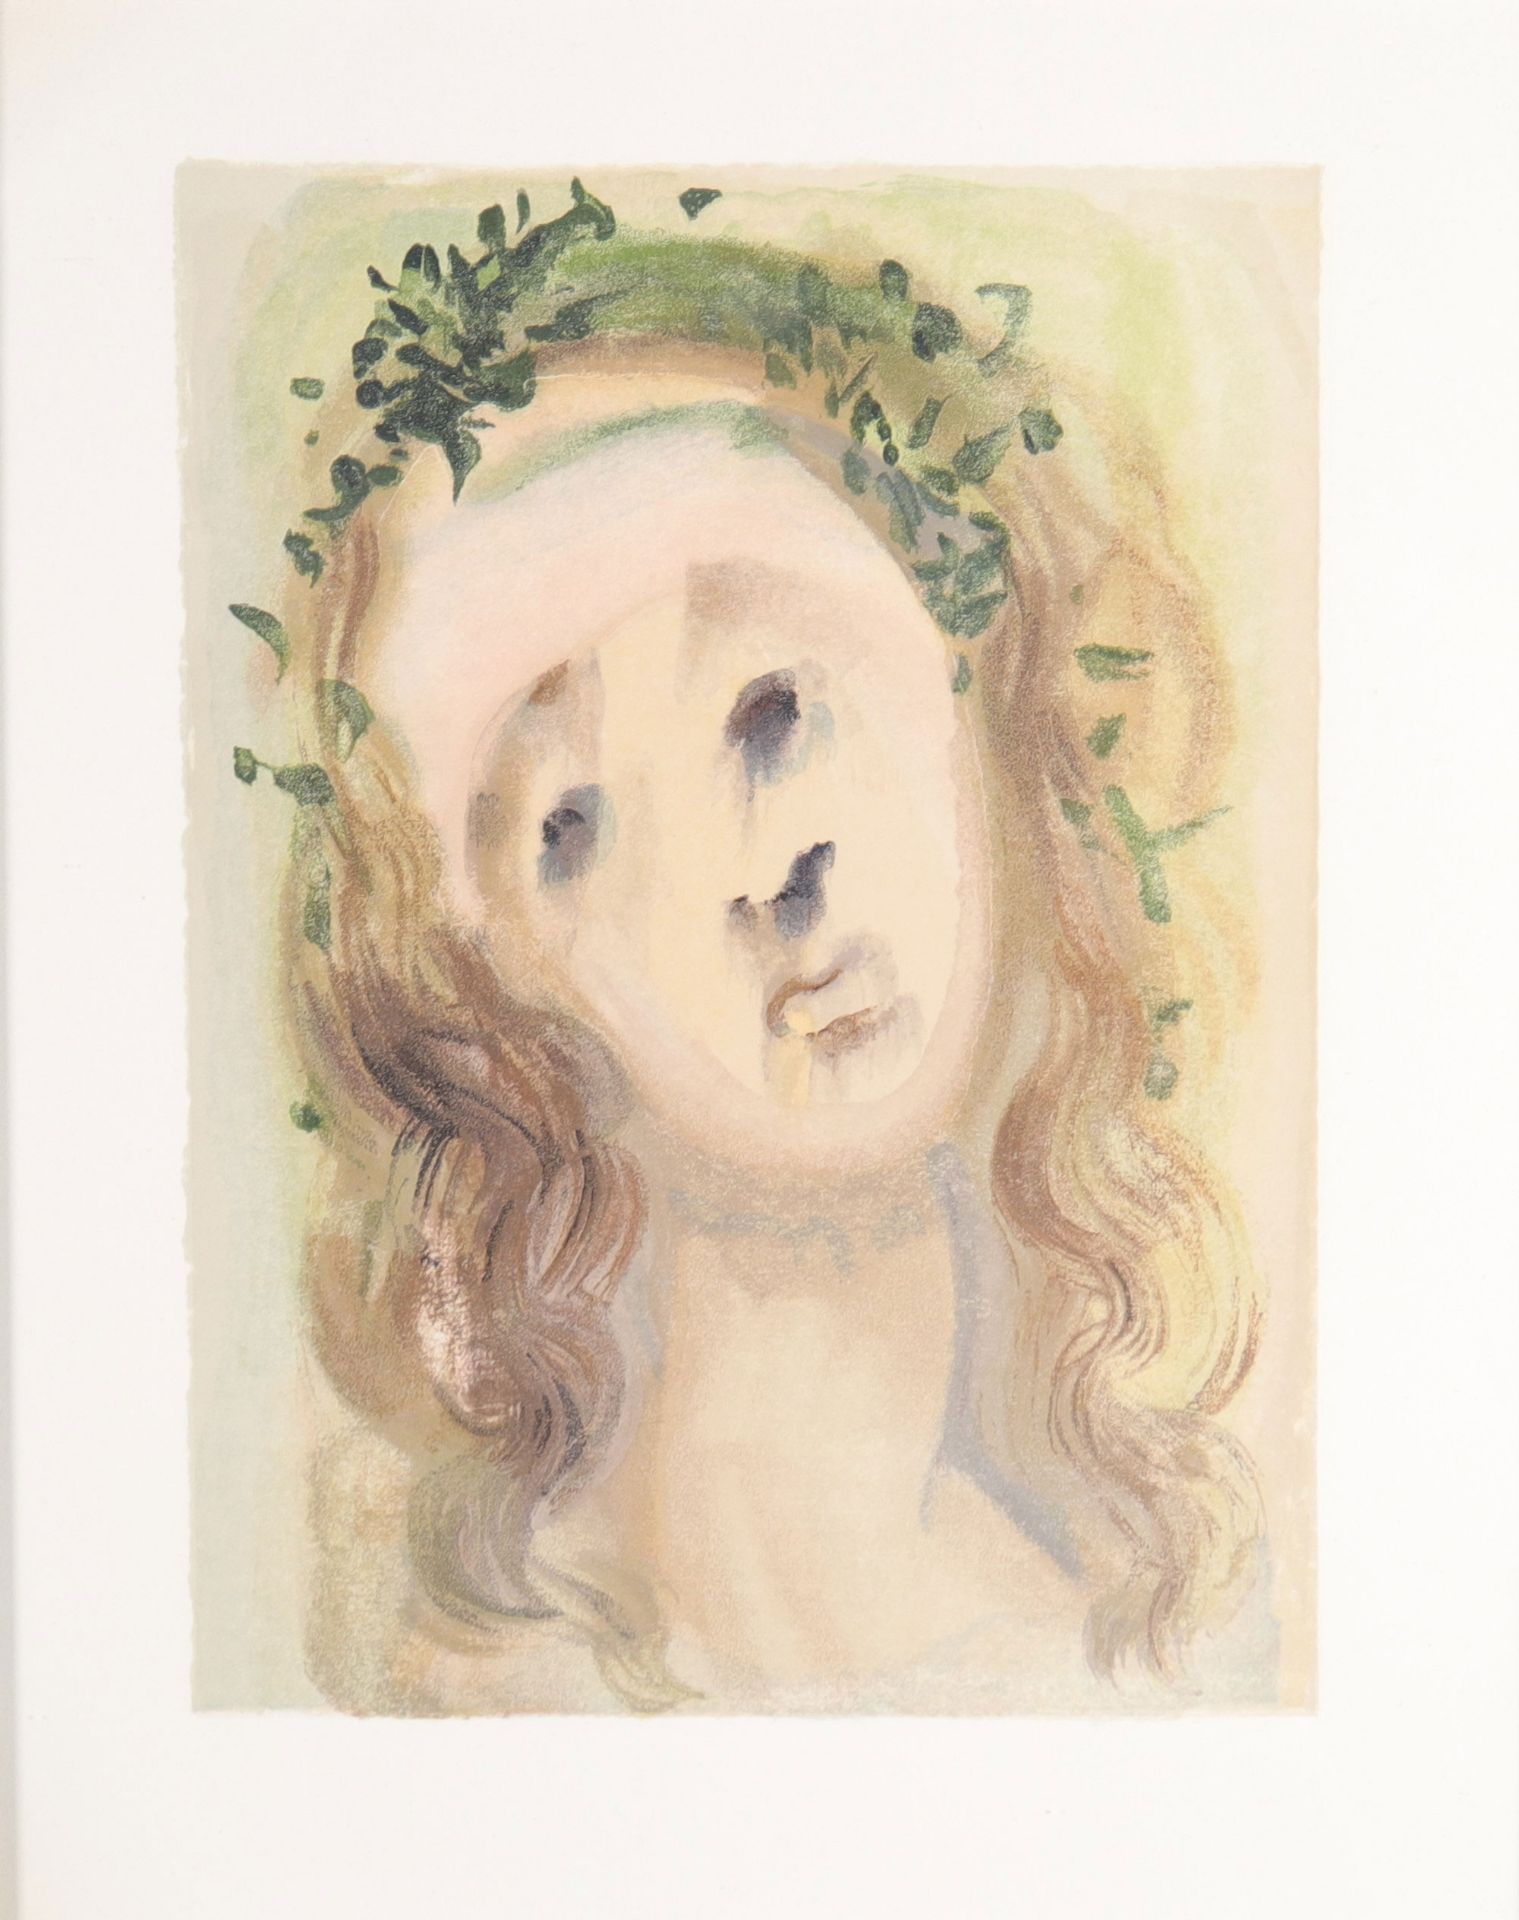 "Salvador Dali. "The face of Virgil". The Divine Comedy - Purgatory - Song 10. 1963."